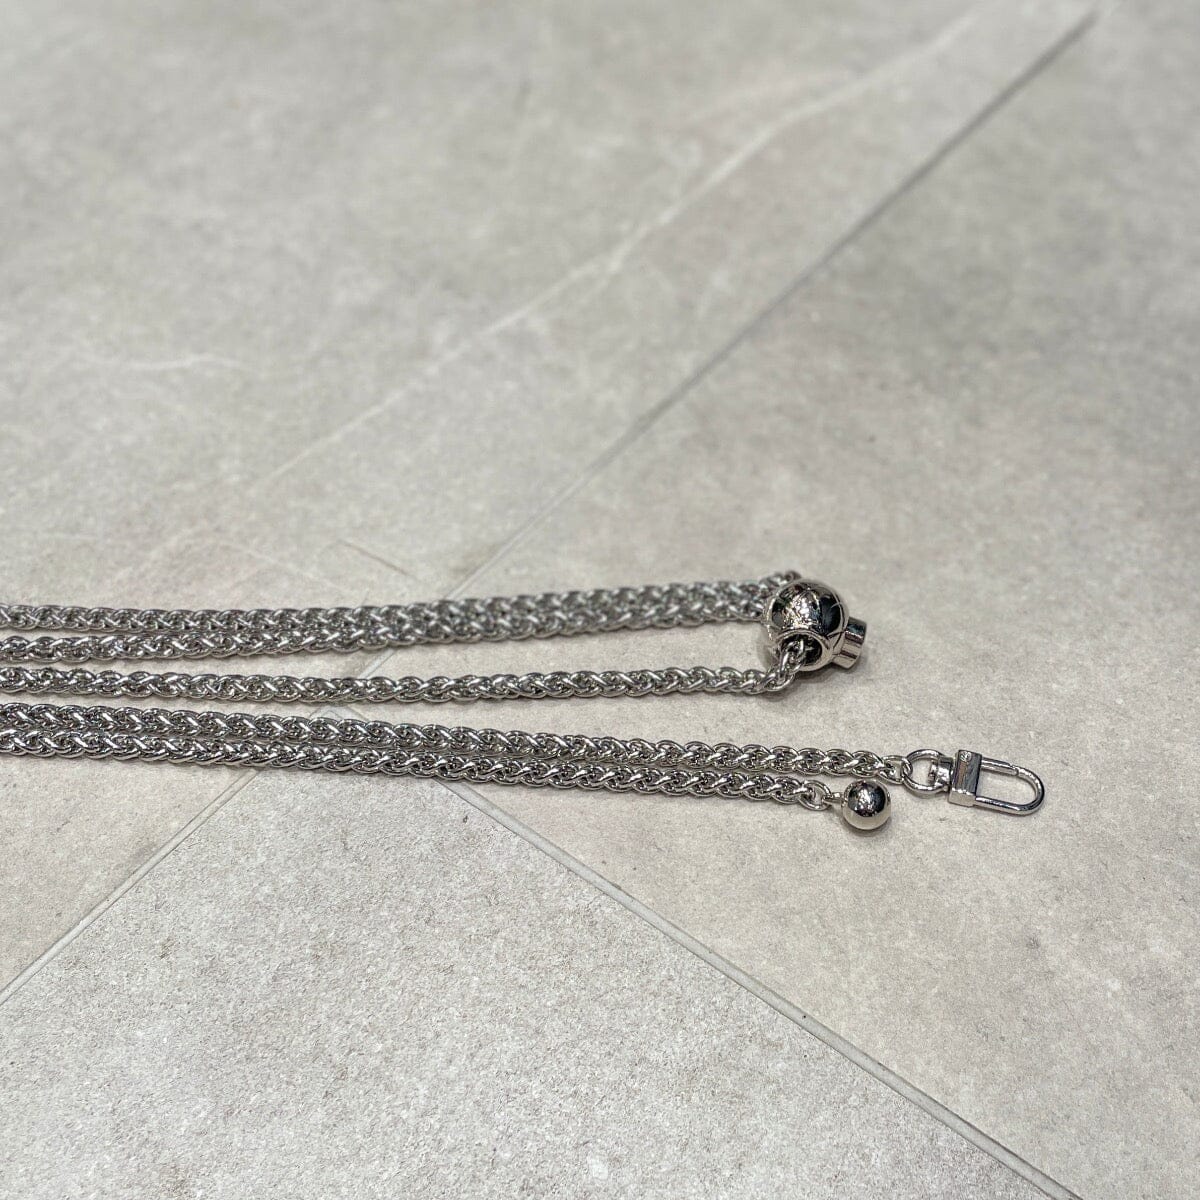 Adjustable 5mm plait weave metal chain Bags Accessories LOVEFREYA 120cm Silver Chain only